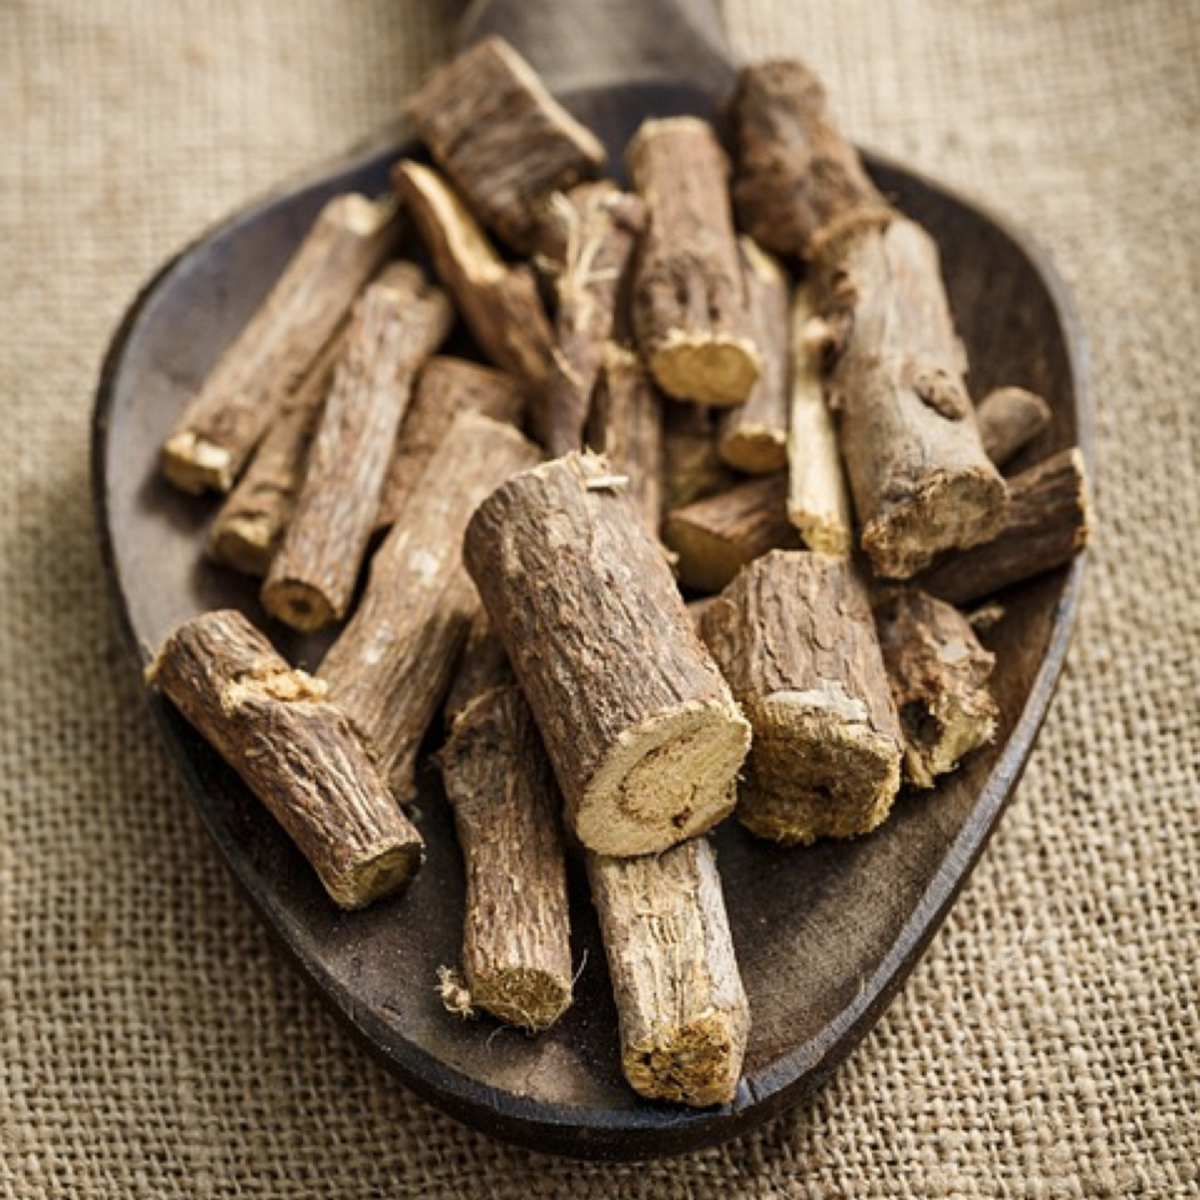 Licorice root nutrition facts